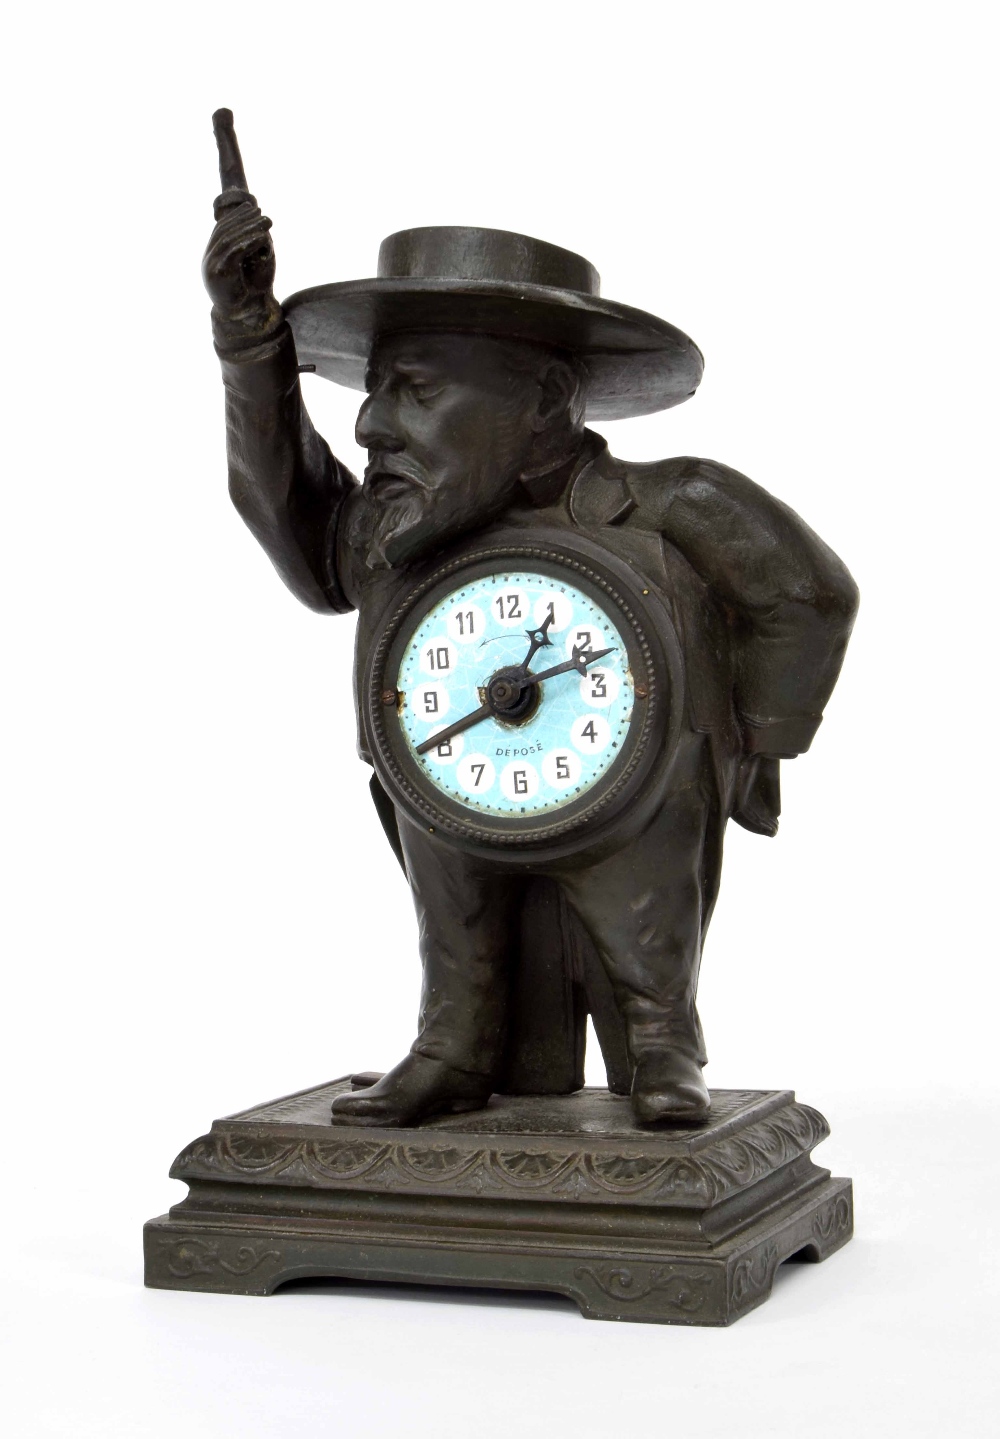 Novelty French figural alarm clock timepiece modelled as Henri de Toulouse-Lautrec, 11" high (at